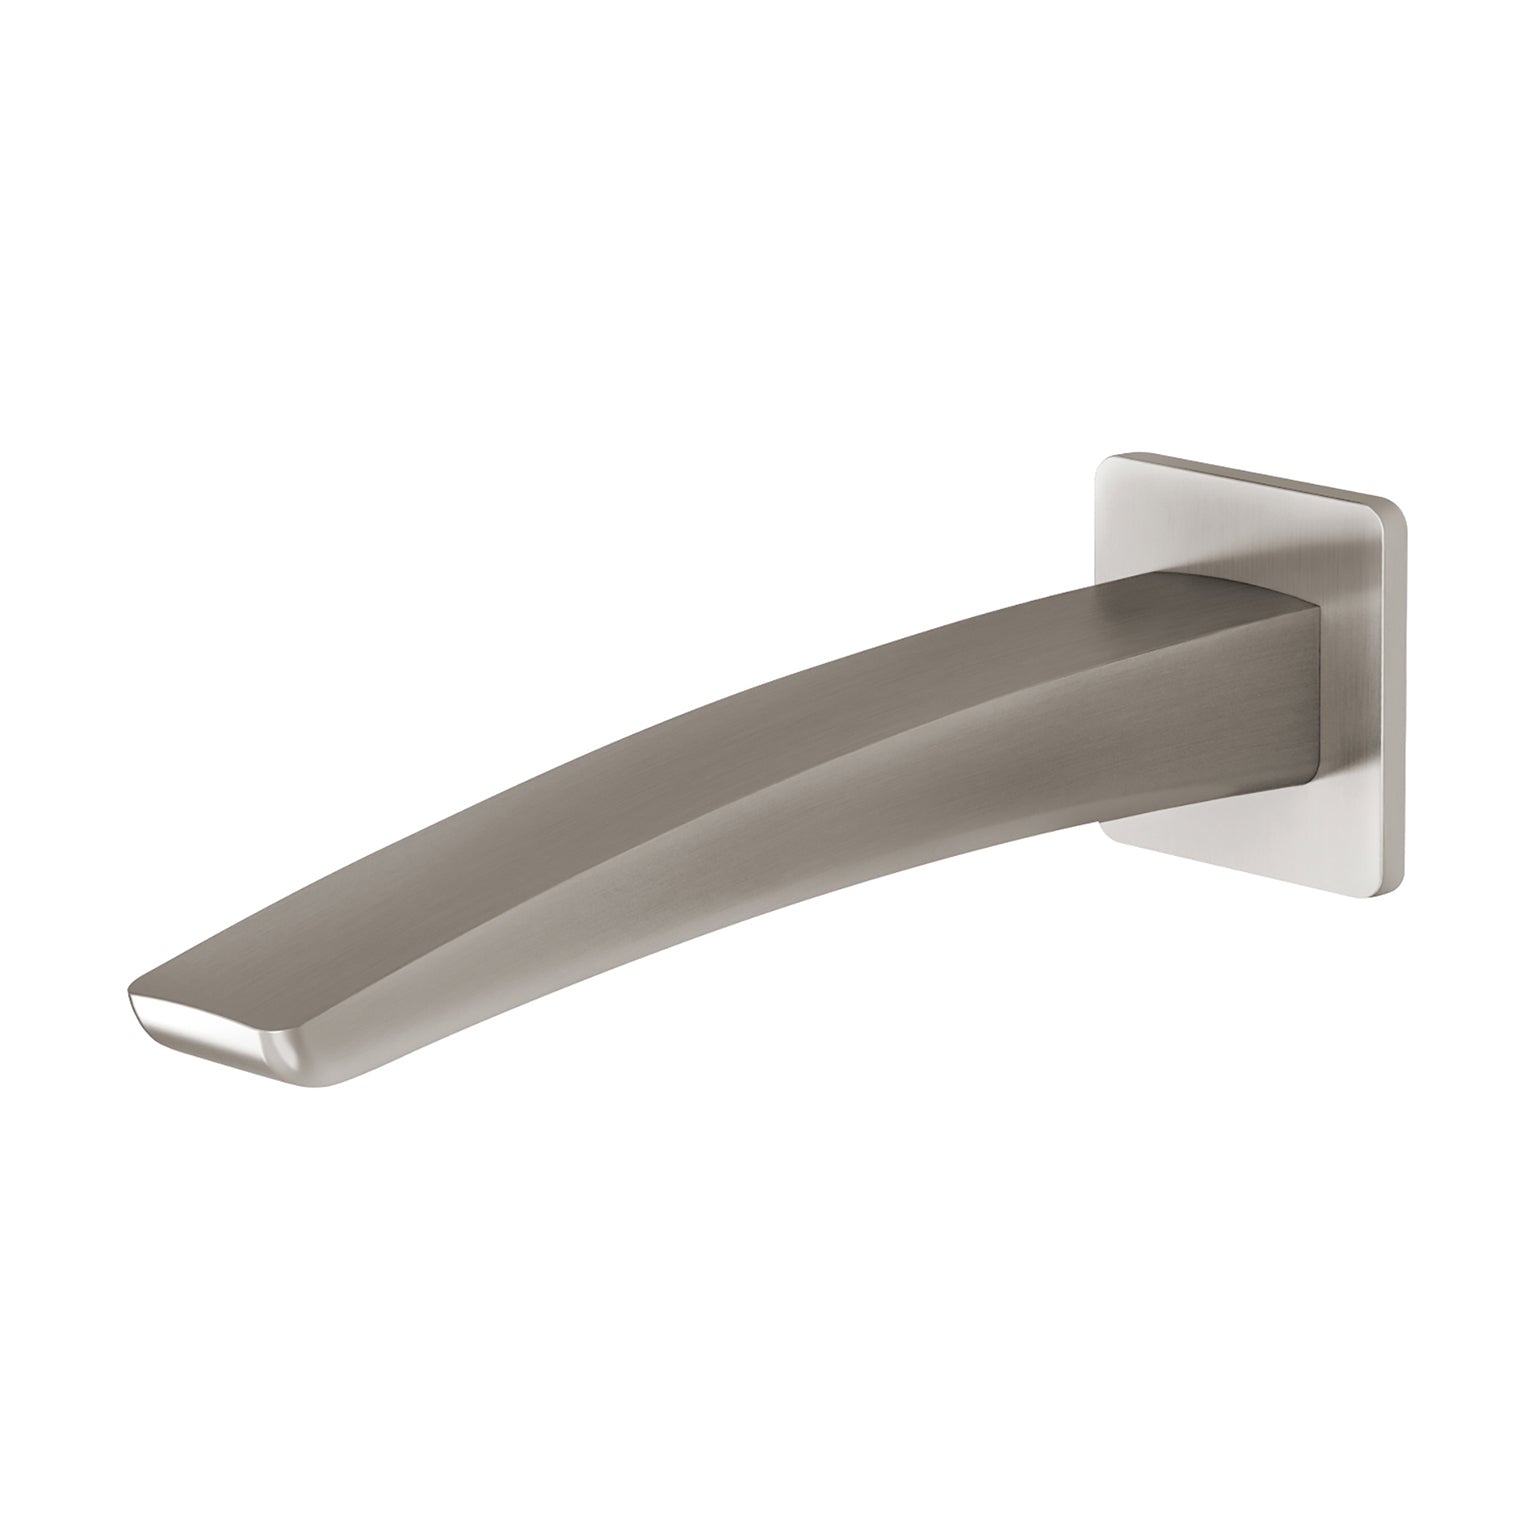 PHOENIX RUSH WALL OUTLET 180MM BRUSHED NICKEL